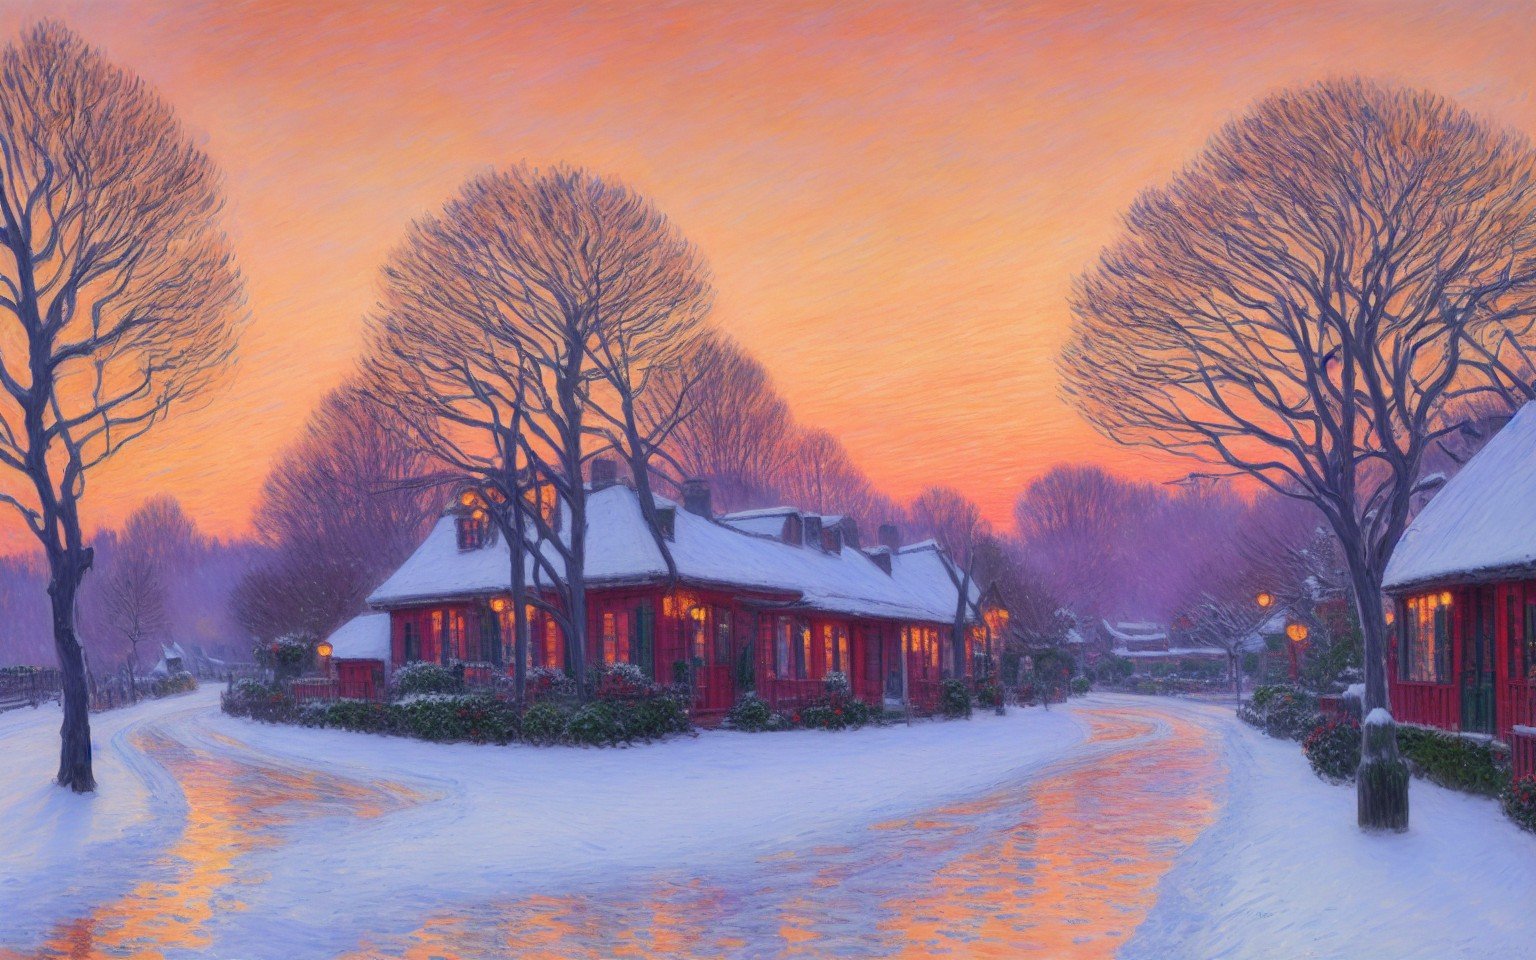 COMING_INTO_GIVERNY_IN_WINTER_SUNSET-Claude-Monet-How-is-AI-used-at-home-The-Ultimate-Guide-to-Simplify-Your-Daily-Tasks-and-Routines